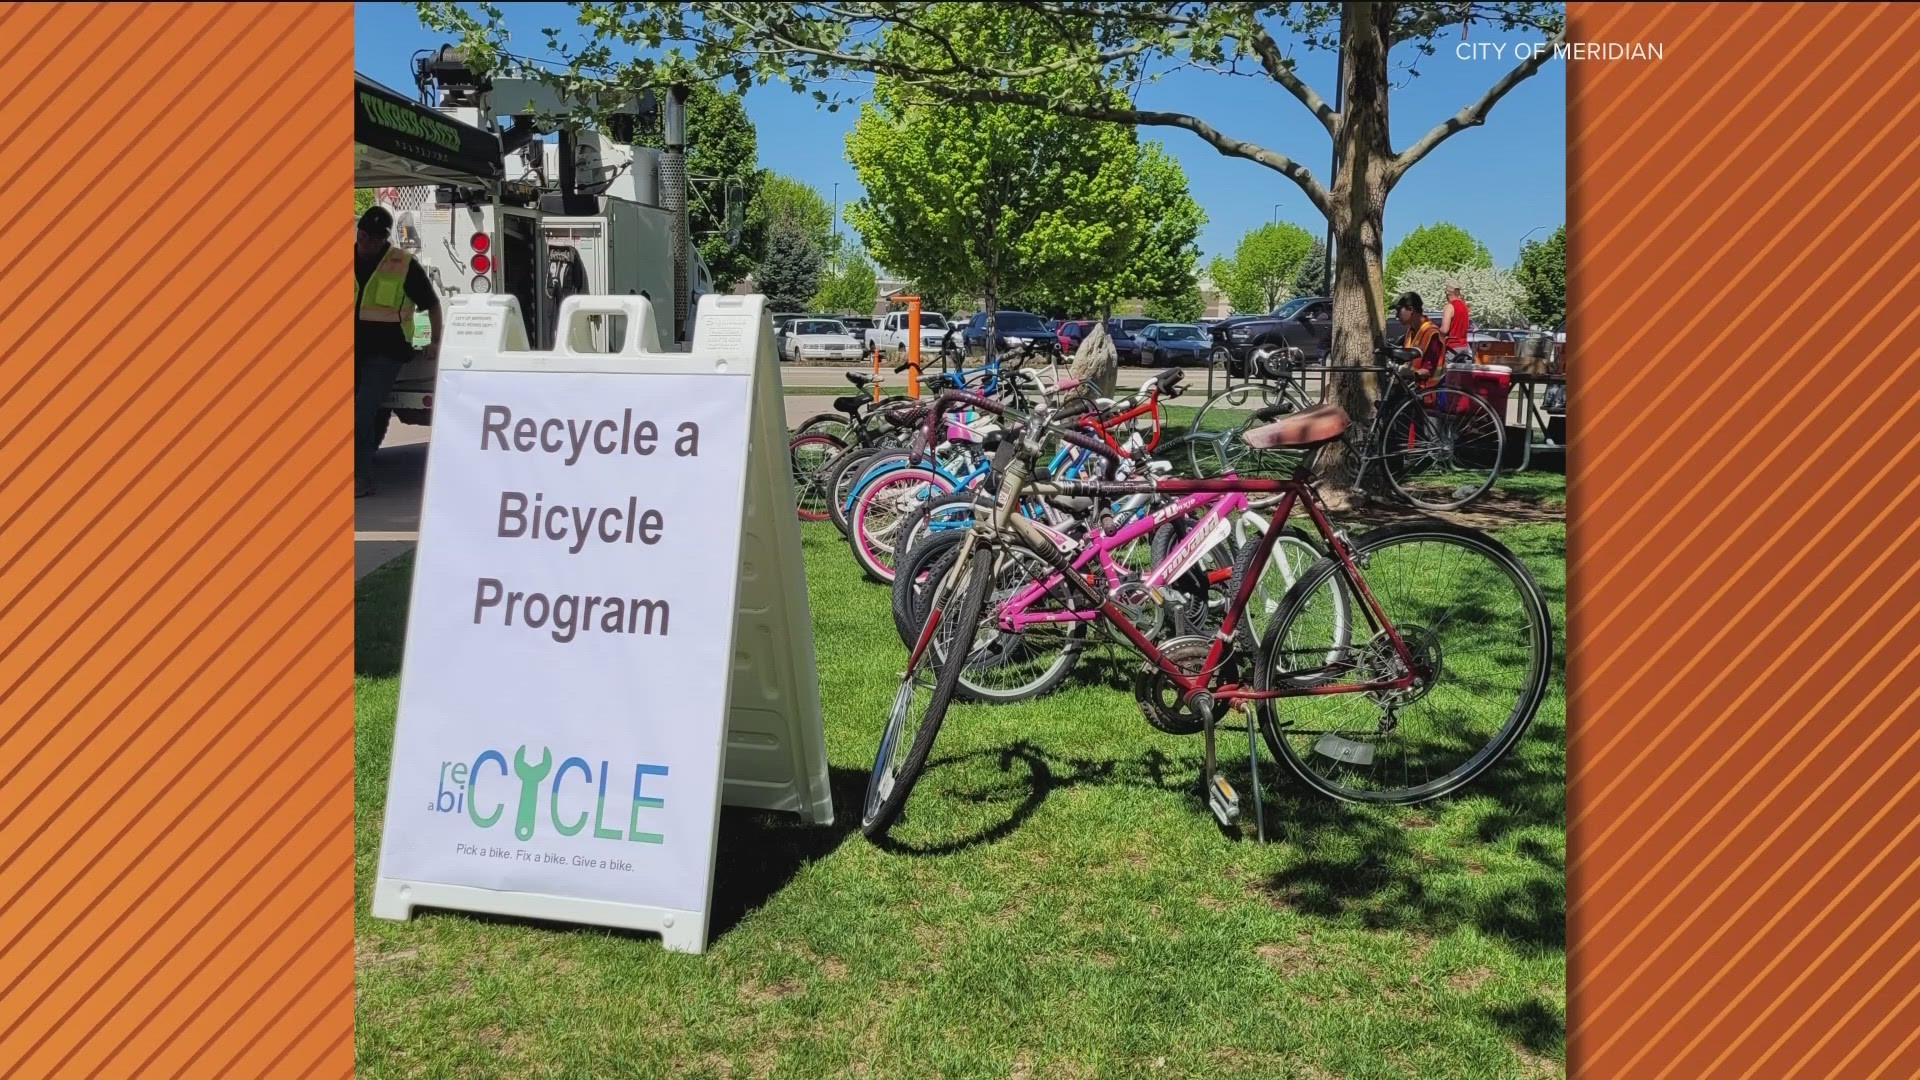 Residents can register for a free refurbished bike through the City of Meridian's Recycle a Bicycle Program until Friday, April 26.